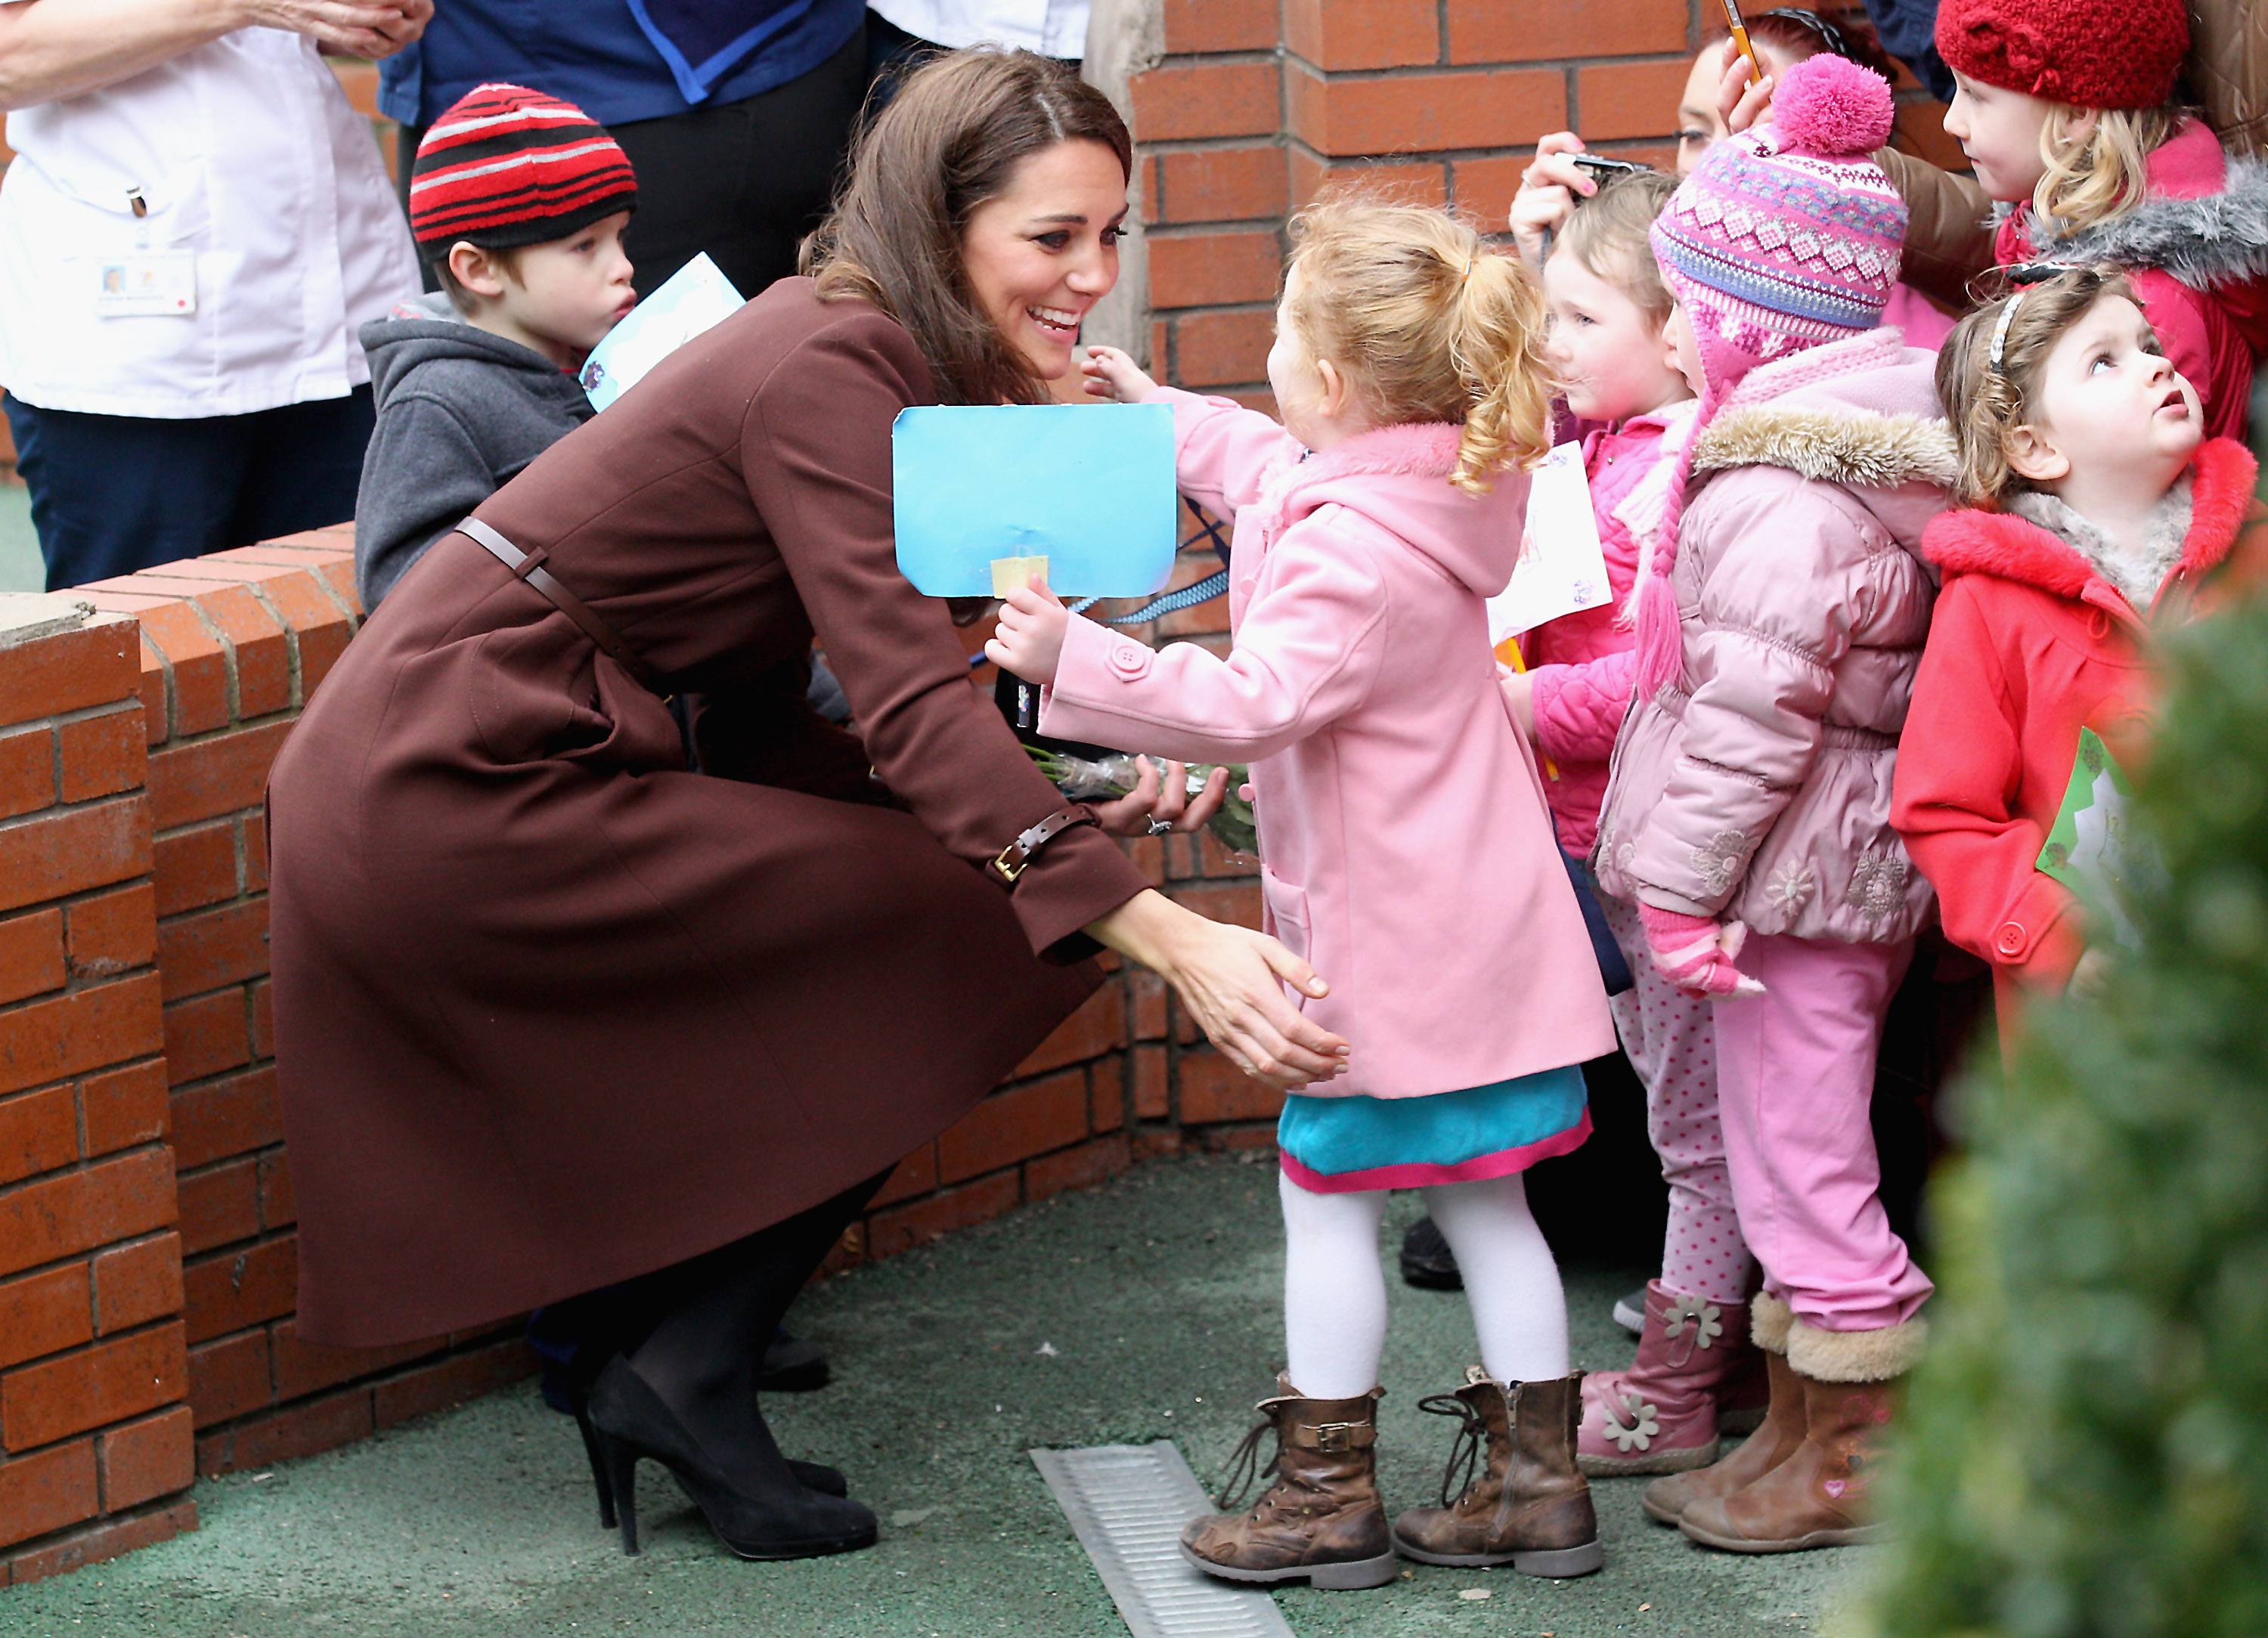 Catherine, Duchess of Cambridge hugs a young girl as she visits Alder Hey Children's NHS Foundation Trust on February 14, 2012 in Liverpool, England. The Duchess has spent the day in Liverpool and arrived at Alder Hey Hospital after a visit to 'The Brink'.